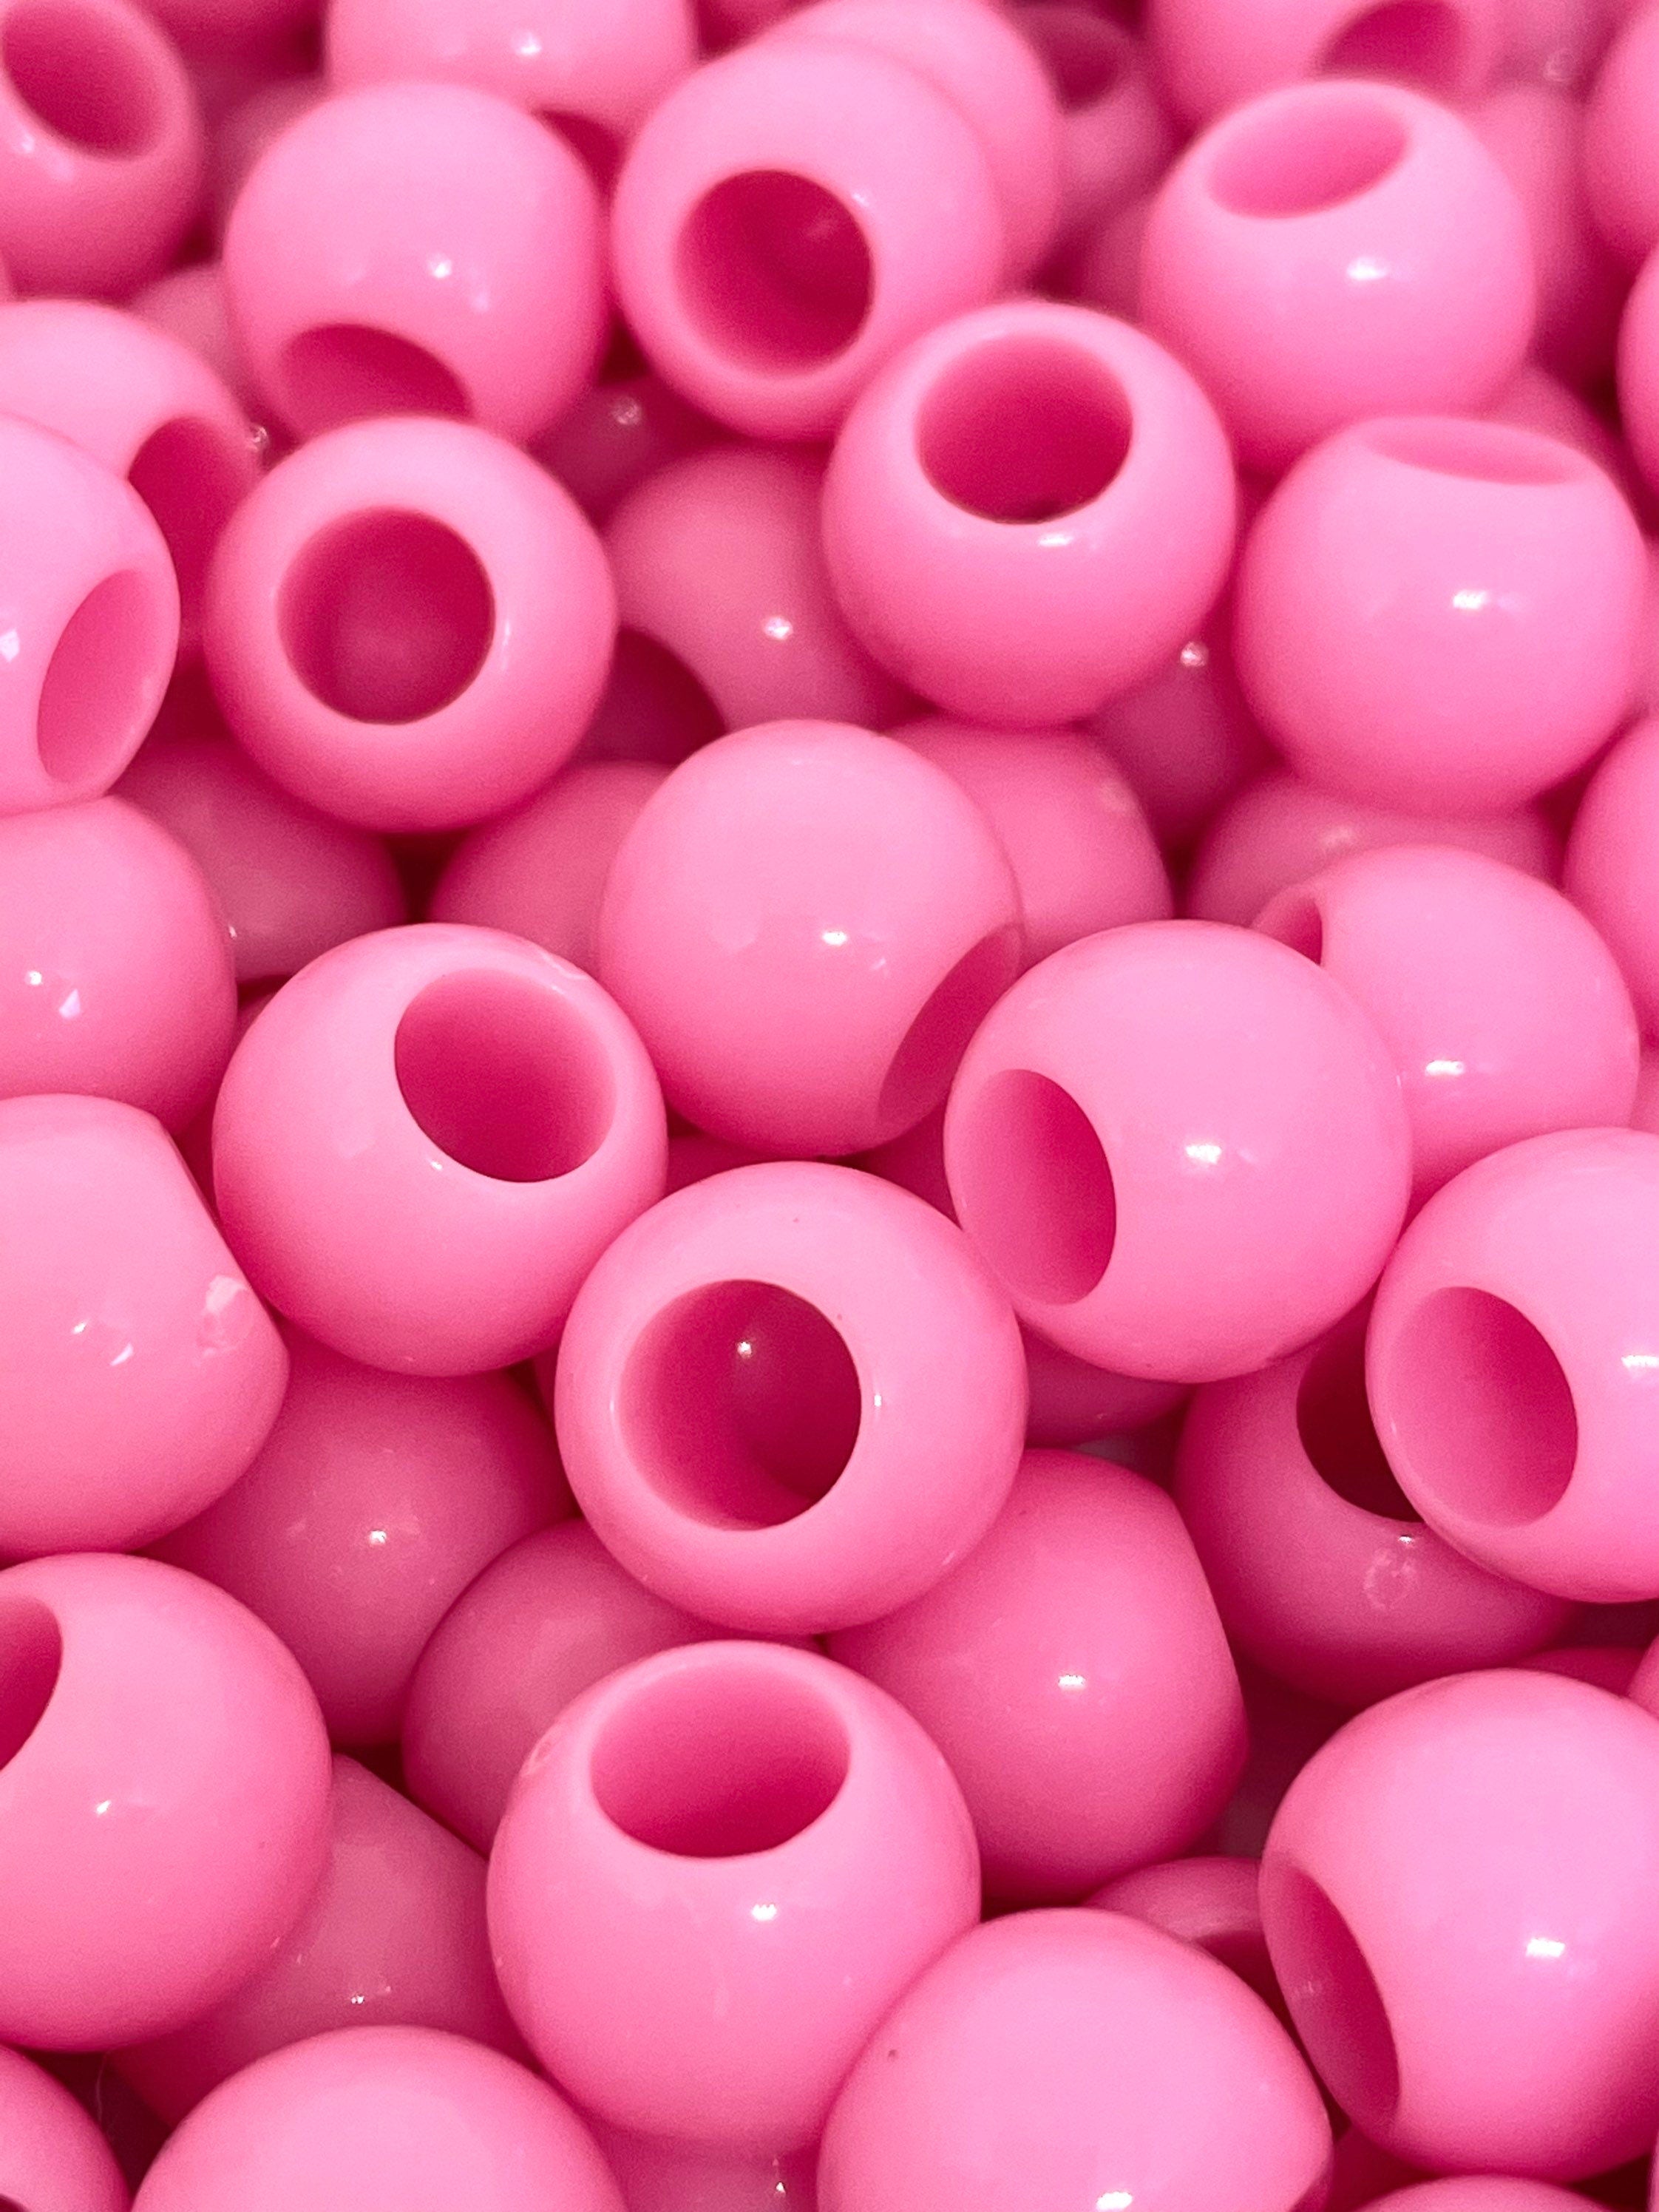 Light Pink Pony Beads, Round Pink Beads for Hair, Hair Beads, Dreadloc